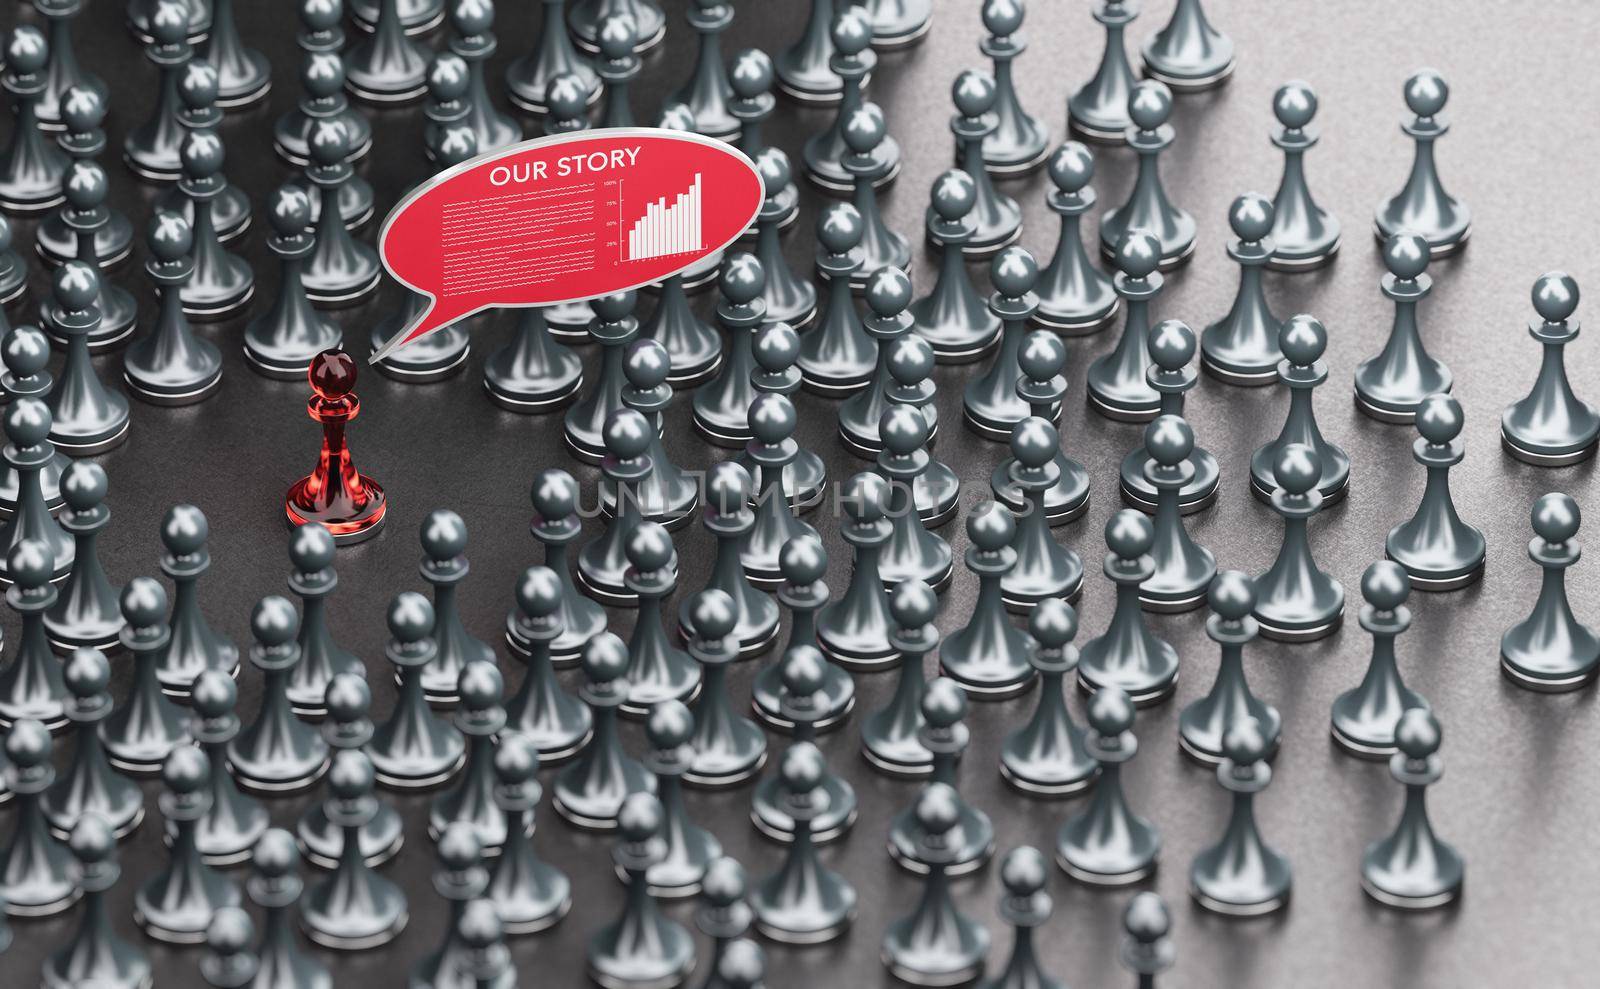 3D illustration of many pawns over black background and a story inside a red speech bubble. Effective storytelling. Brand communication concept.